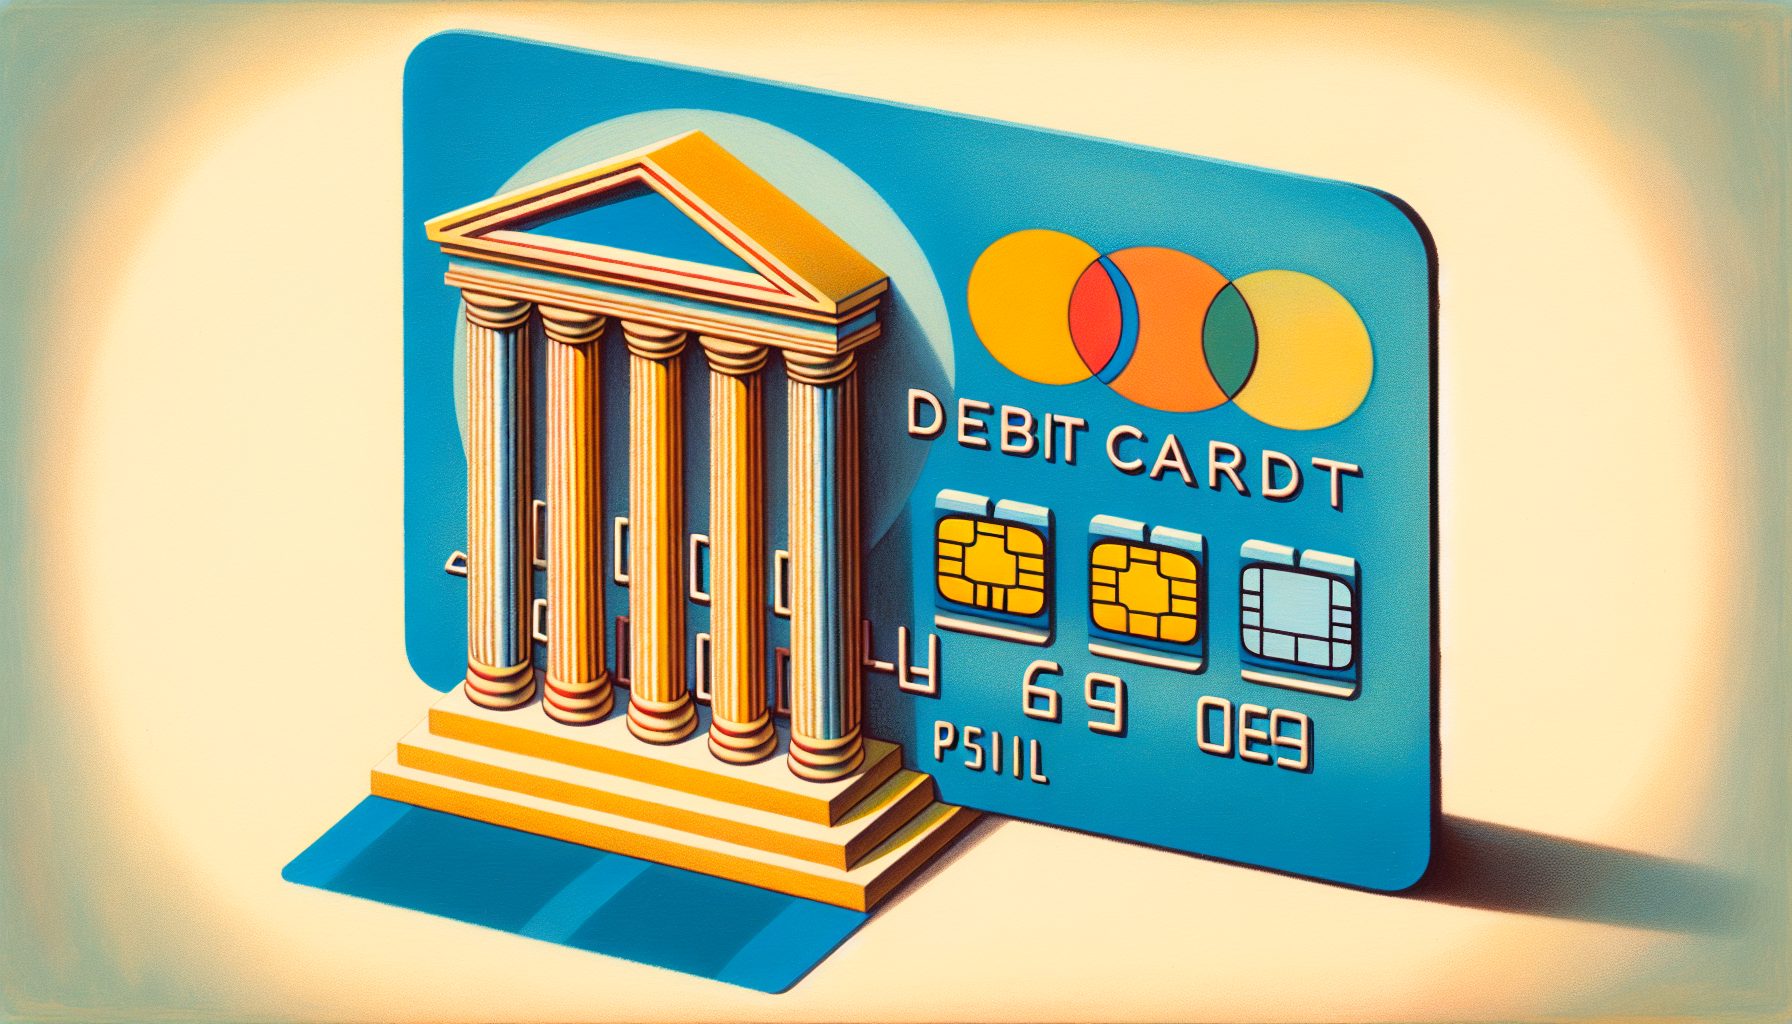 "Streamlined Banking Cards"